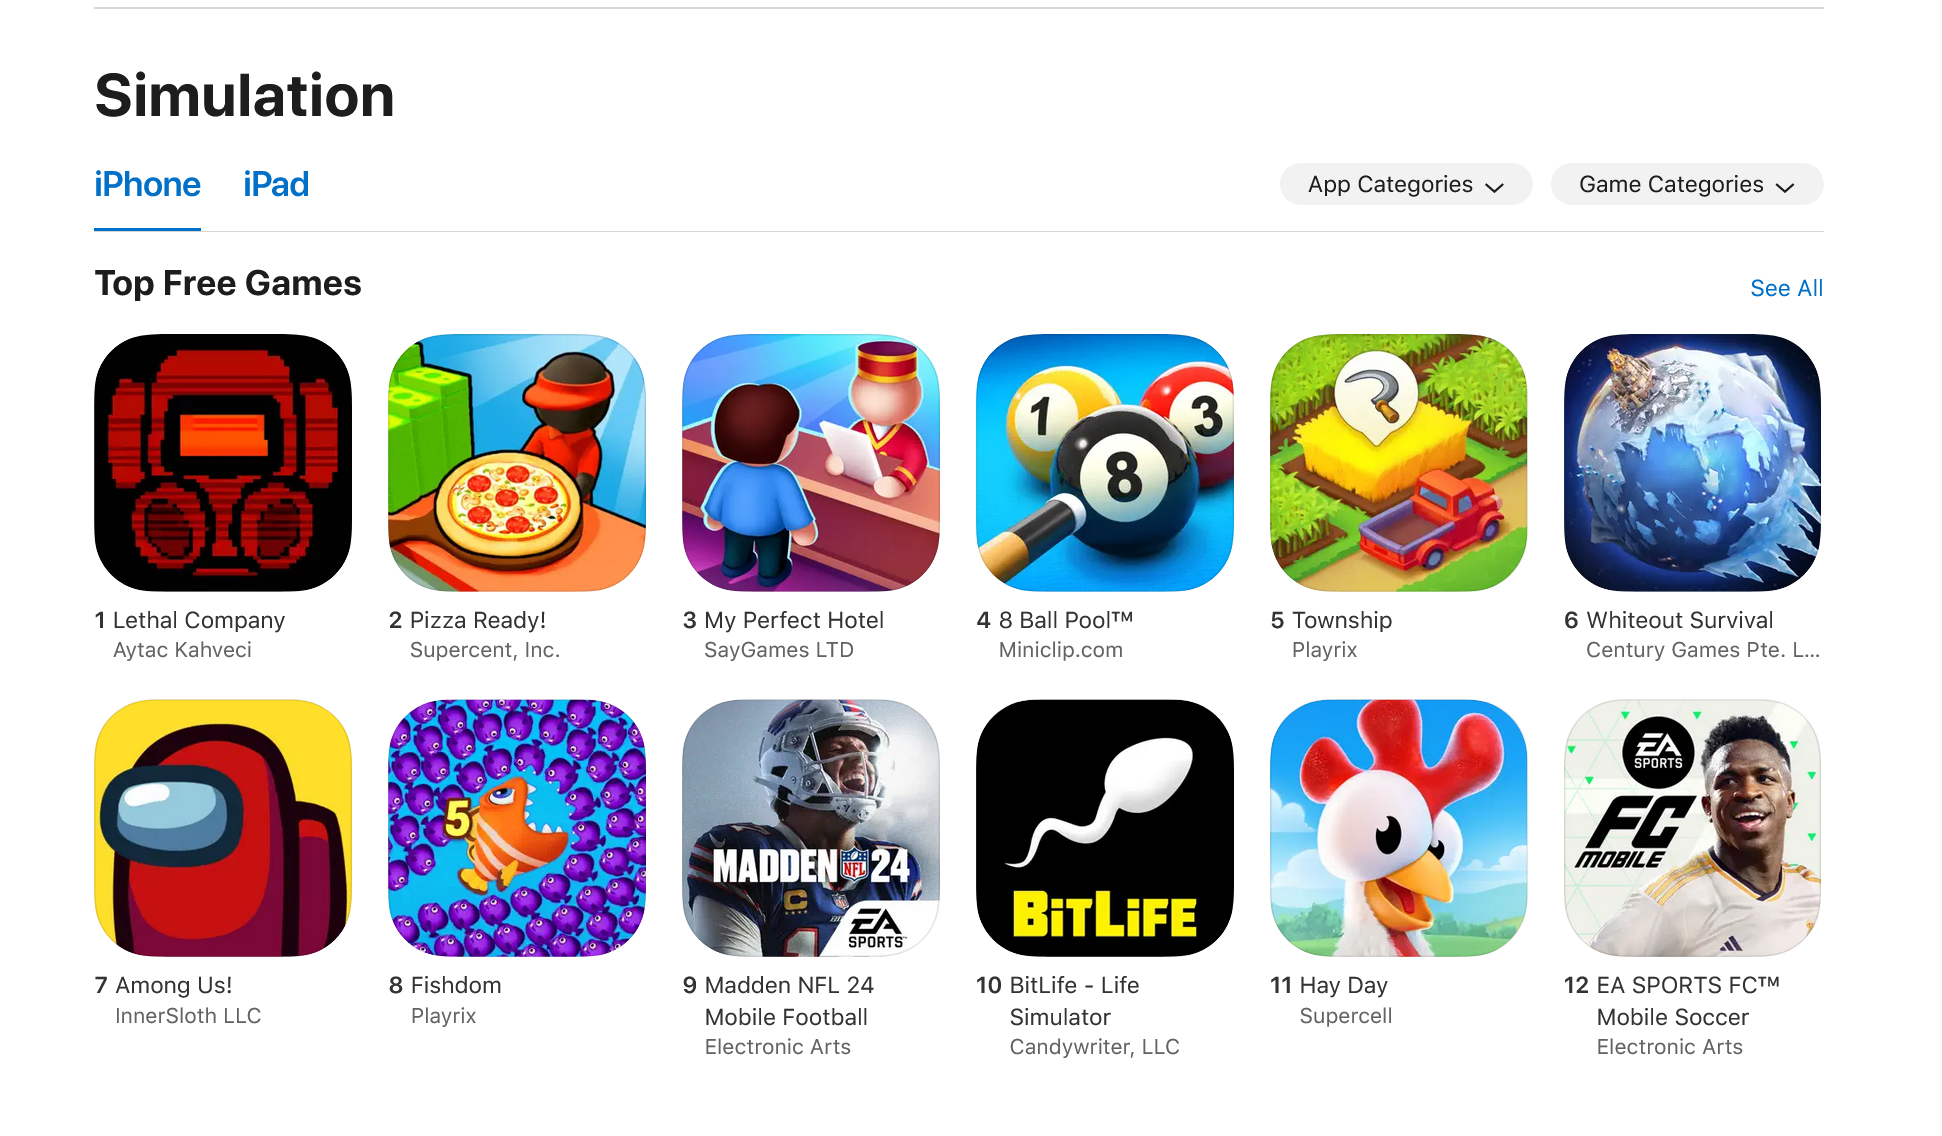 Lethal Company in the top spot in the App Store simulation category